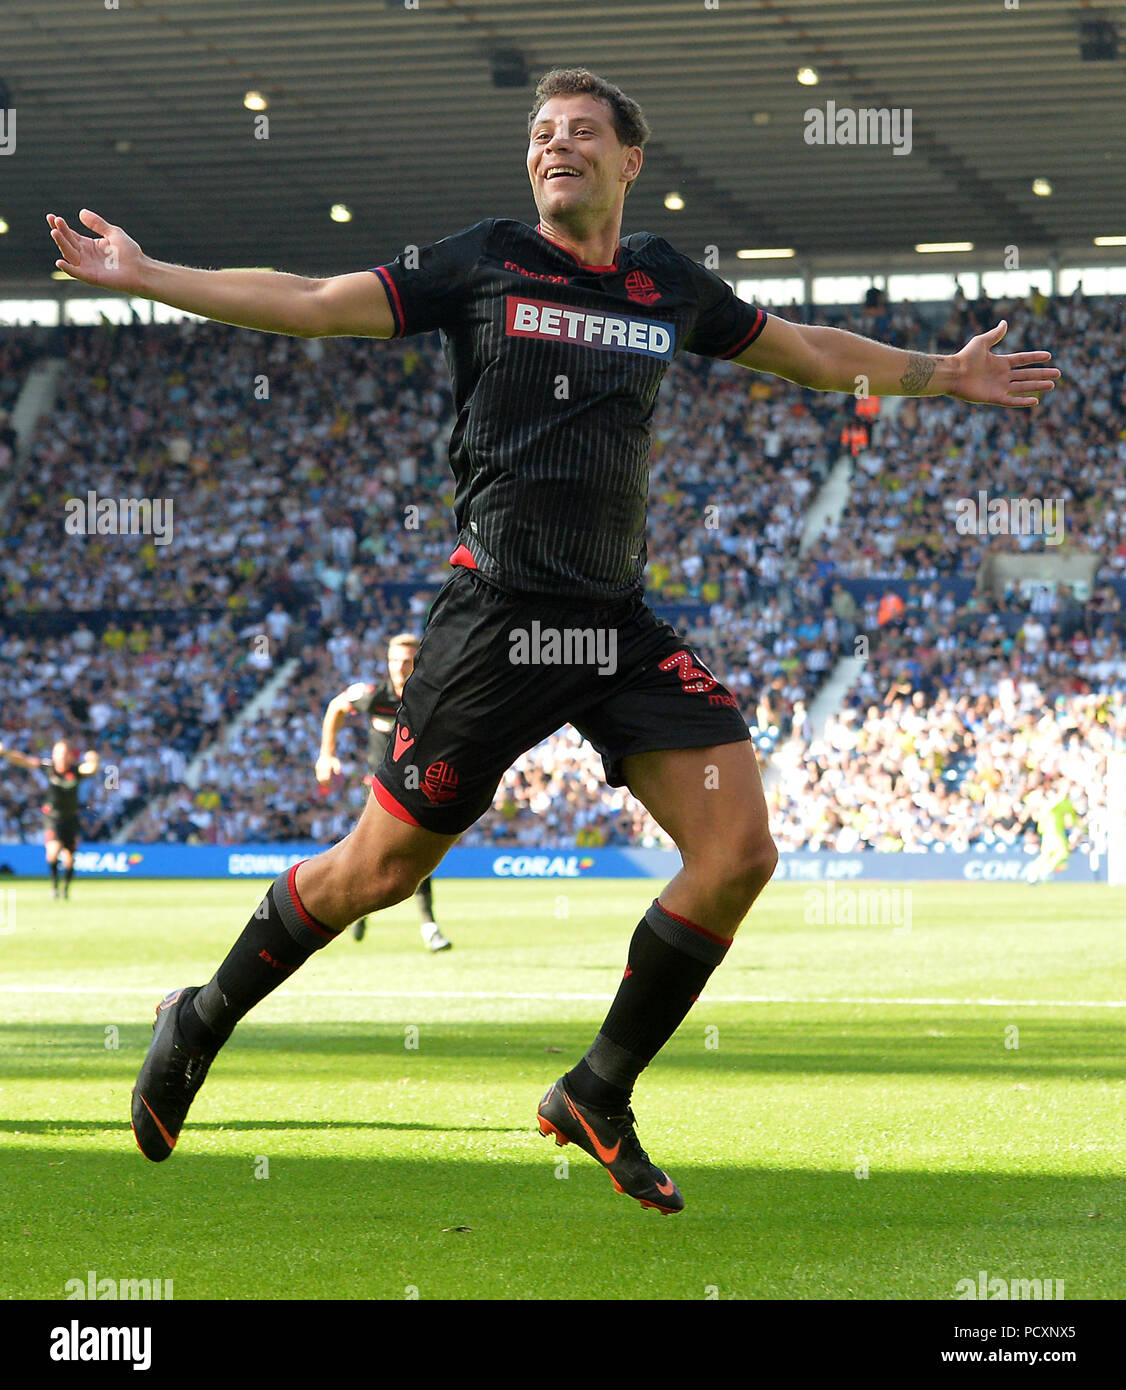 Bolton Wanderers Yanic Wildschut celebrates scoring his sides second goal of the game during the Sky Bet Championship match at The Hawthorns, West Bromwich